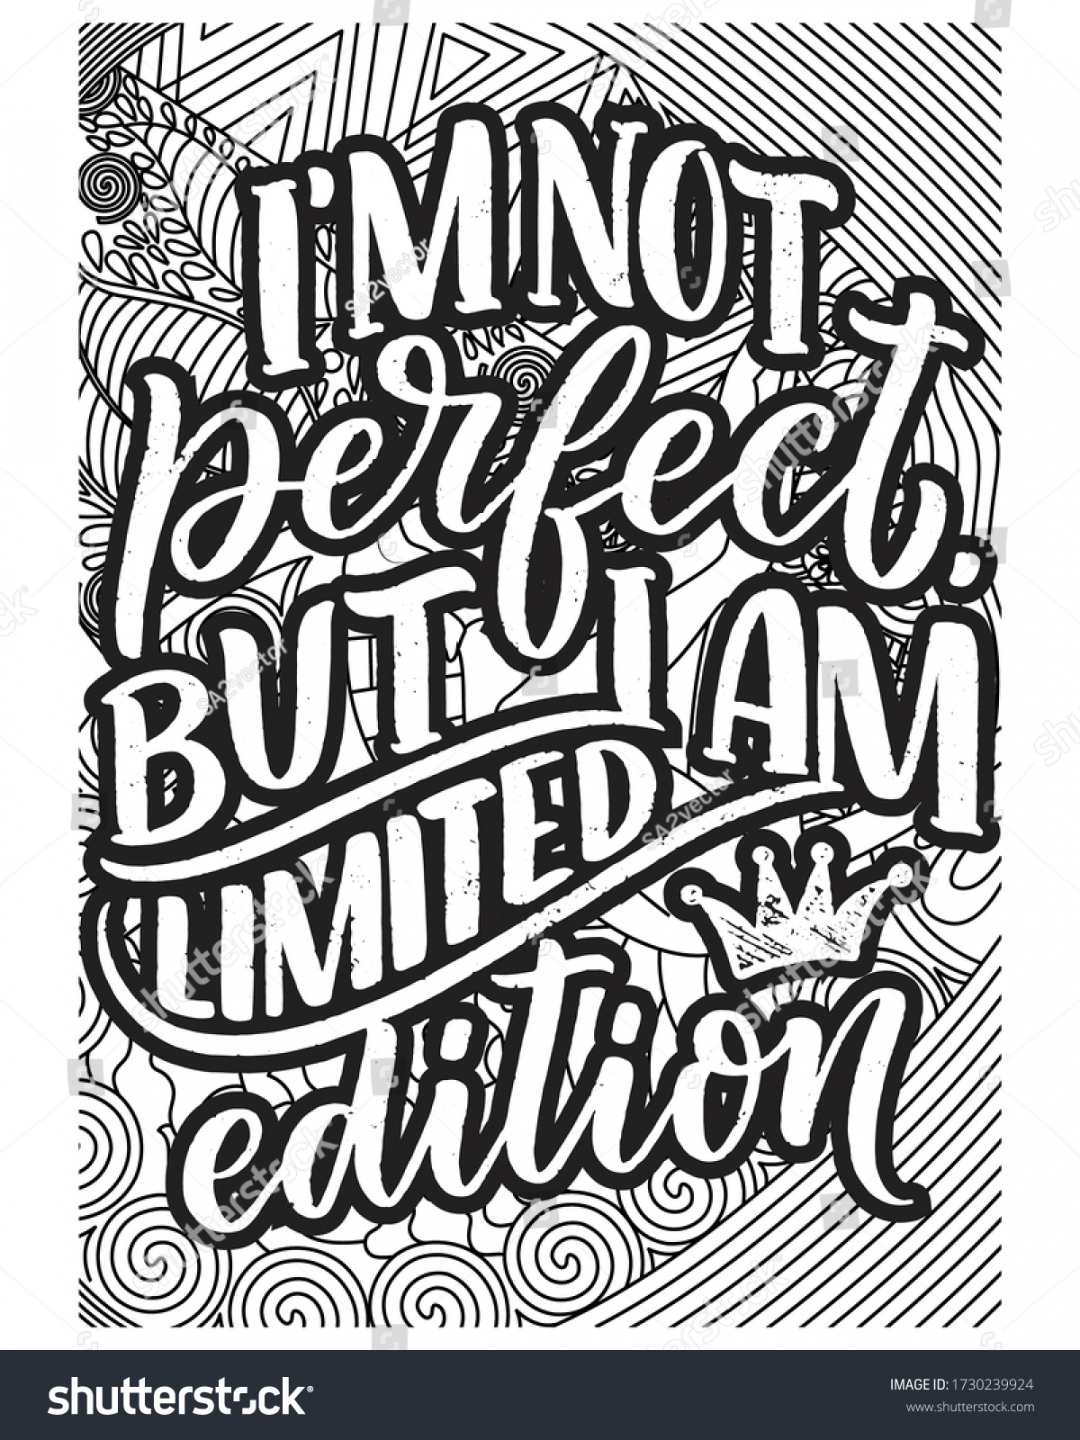 Adult Coloring Pages Quotes Images: Browse , Stock Photos  - FREE Printables - Free Printable Coloring Pages For Adults Quotes